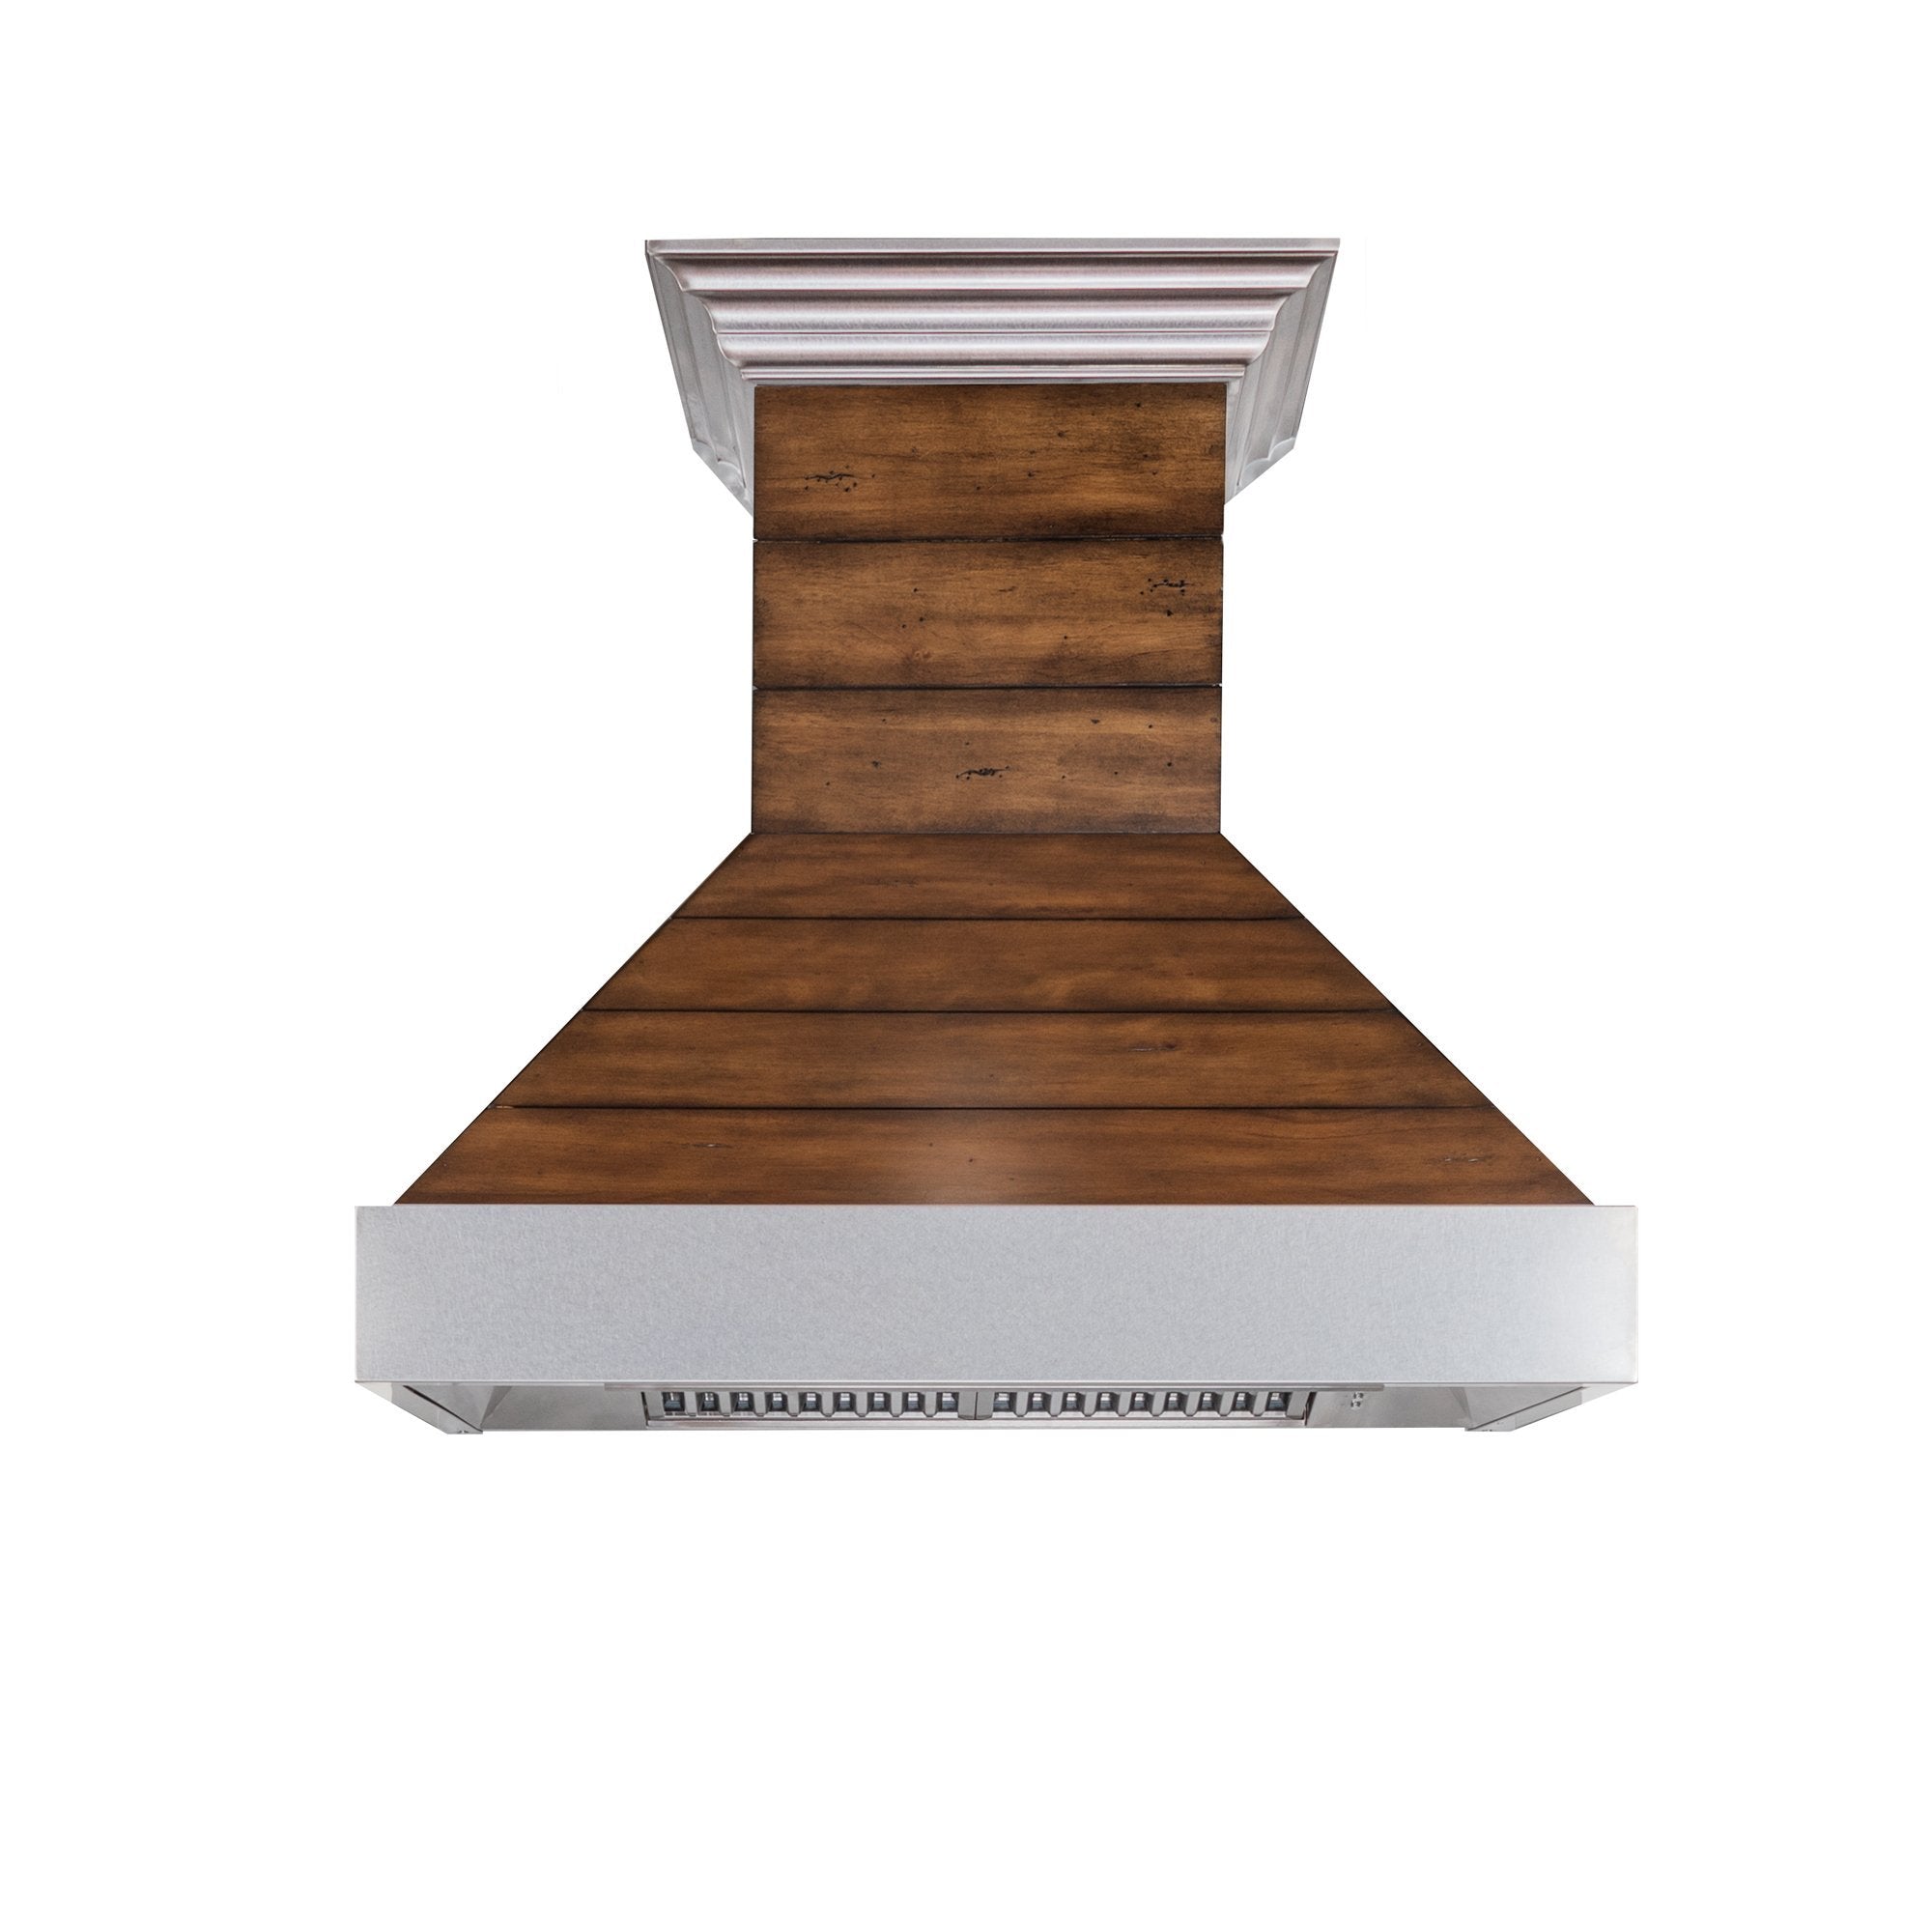 ZLINE Kitchen and Bath, ZLINE Shiplap Wooden Wall Range Hood with Stainless Steel Accent - Includes Motor (365BB), 365BB-30,